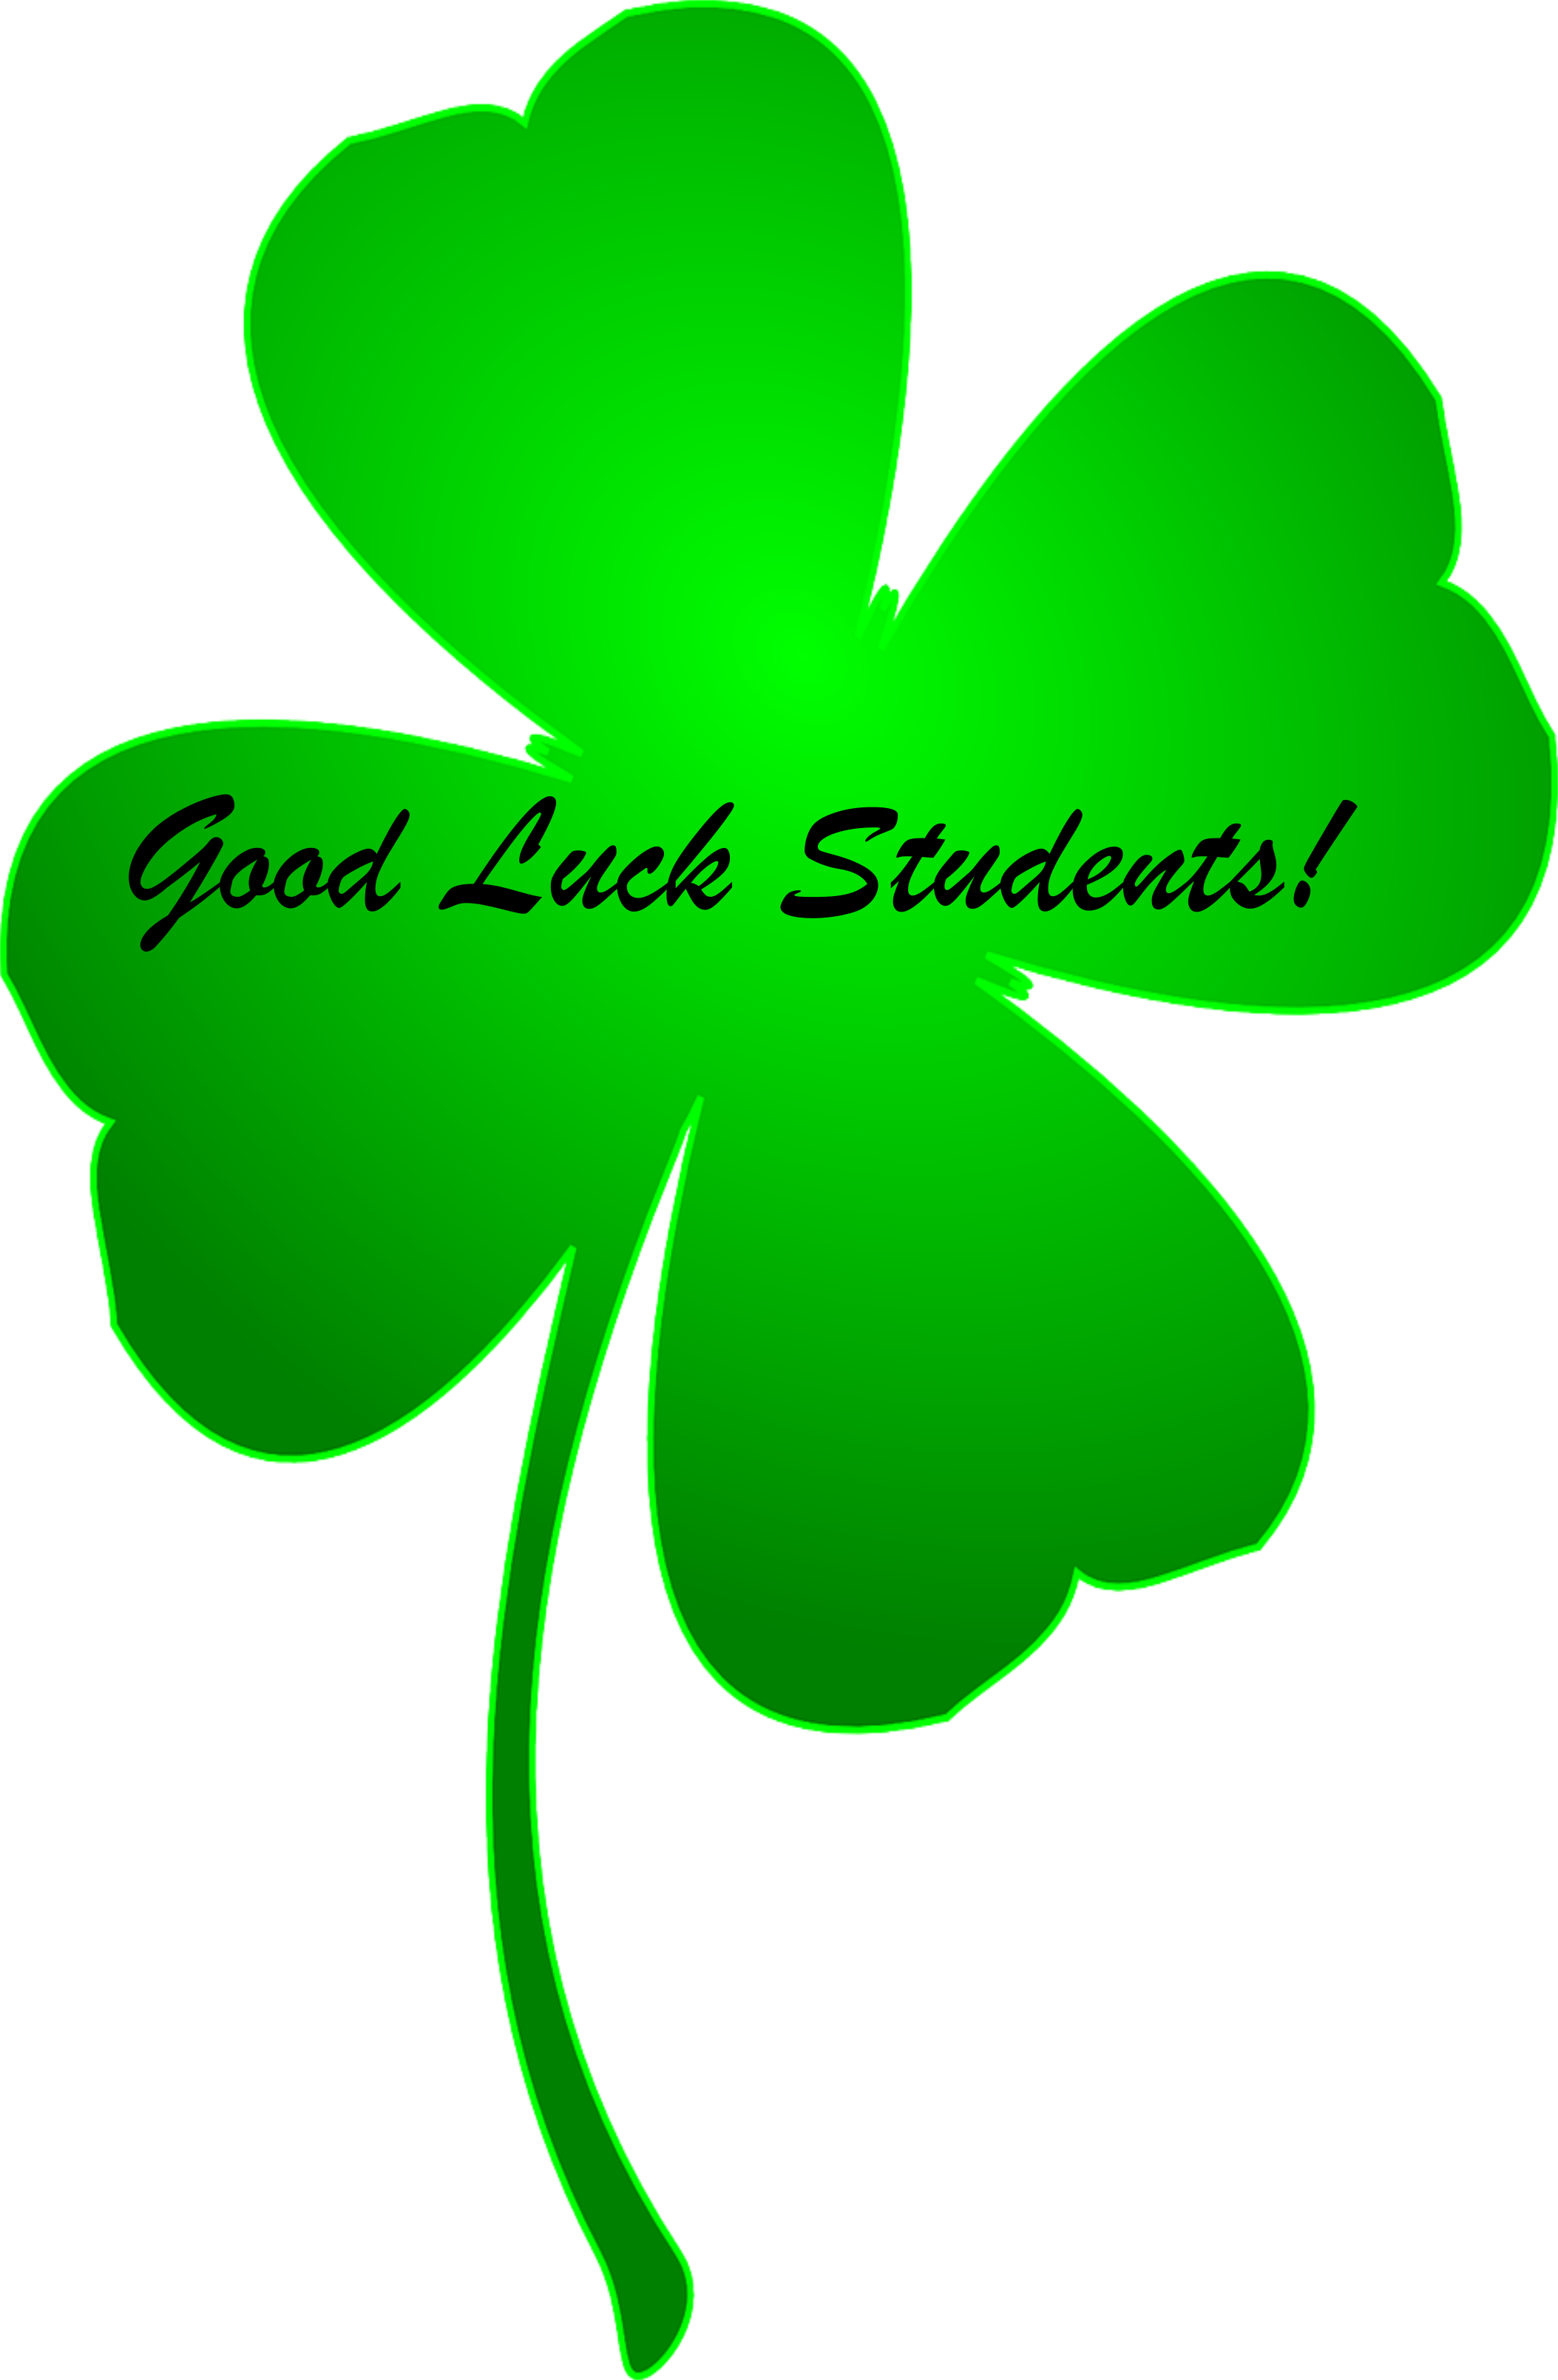 Good Luck For The Other Subjects To All Our Students - St Patricks Day Clover (2107x3219)